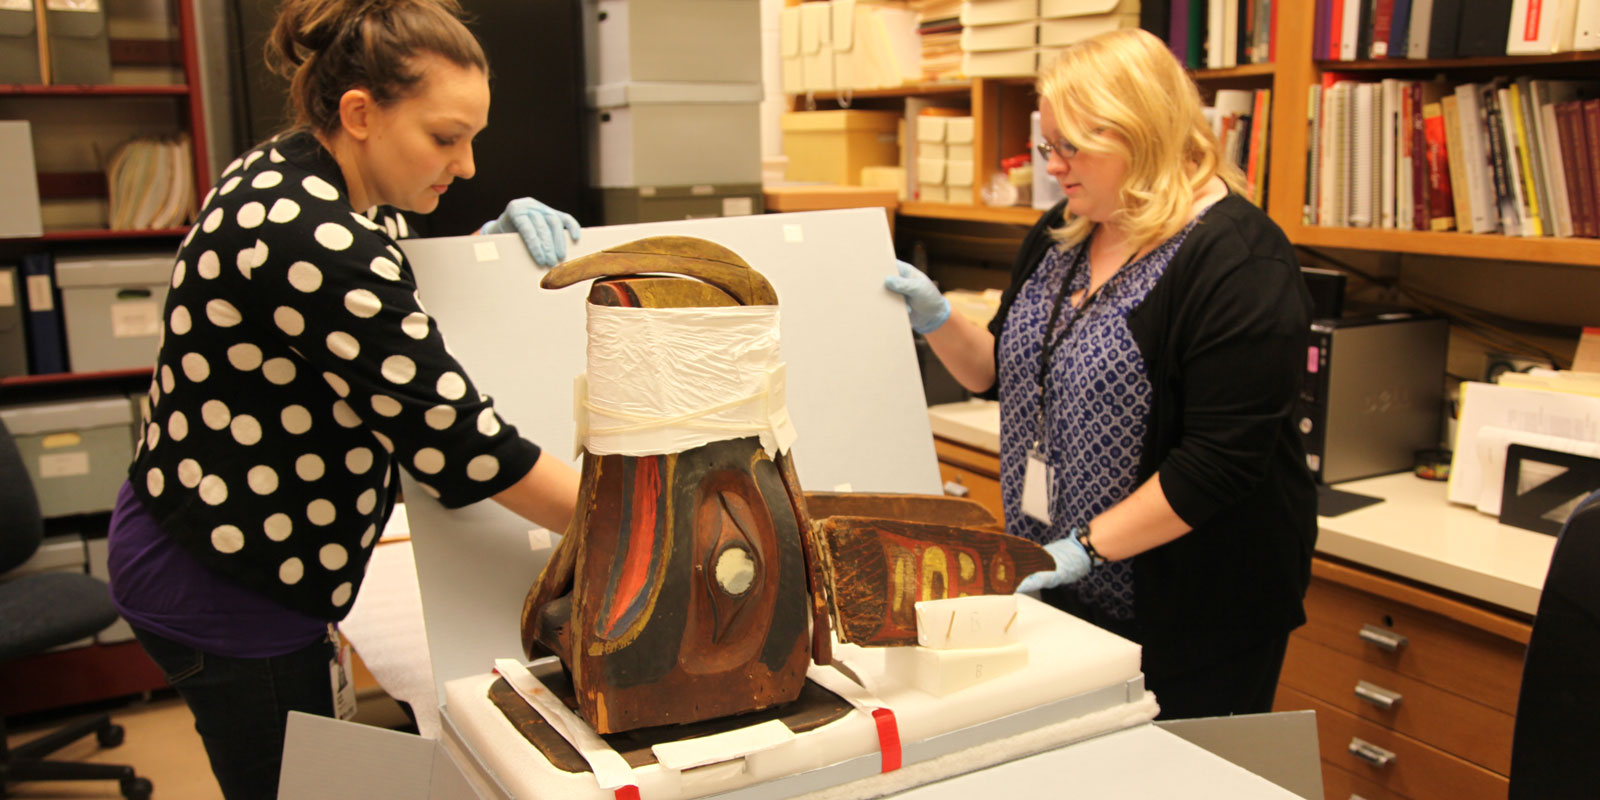 Two woman carefully unpack the native art mask from a box